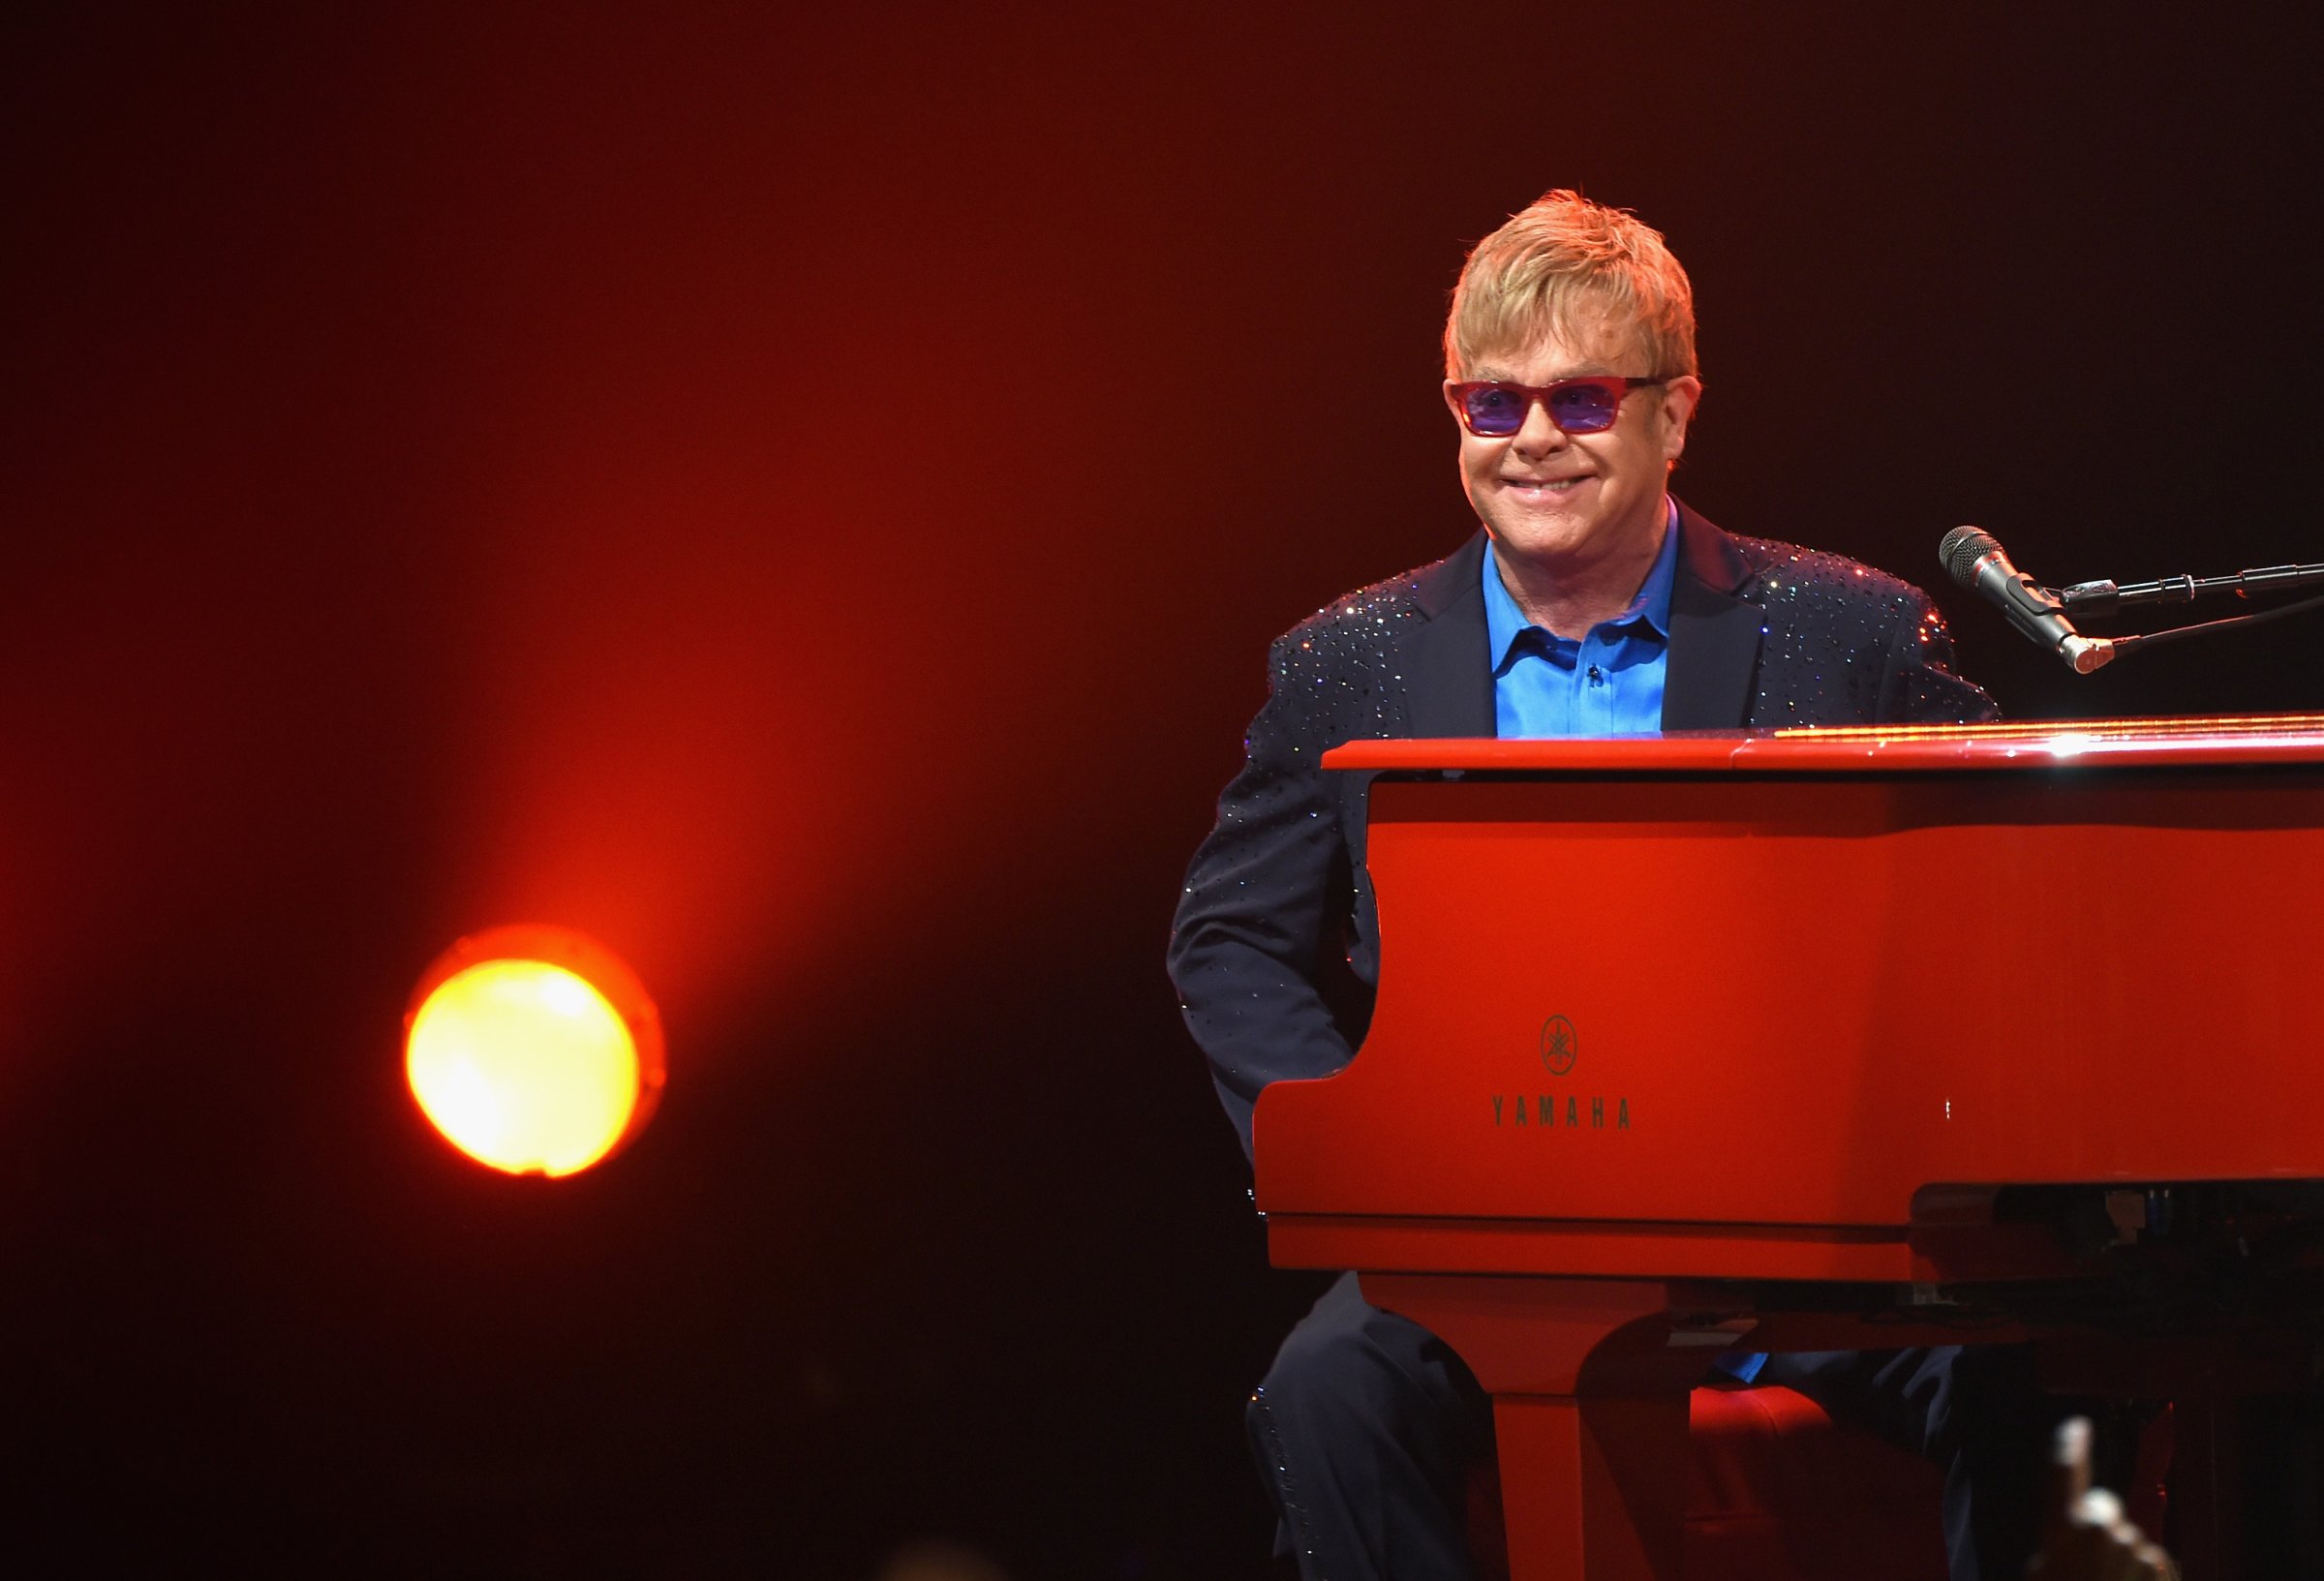 Elton John performed songs from his new album Wonderful Crazy Night as well as classic hits, on Jan. 13, 2016 at the Wiltern in Los Angeles.